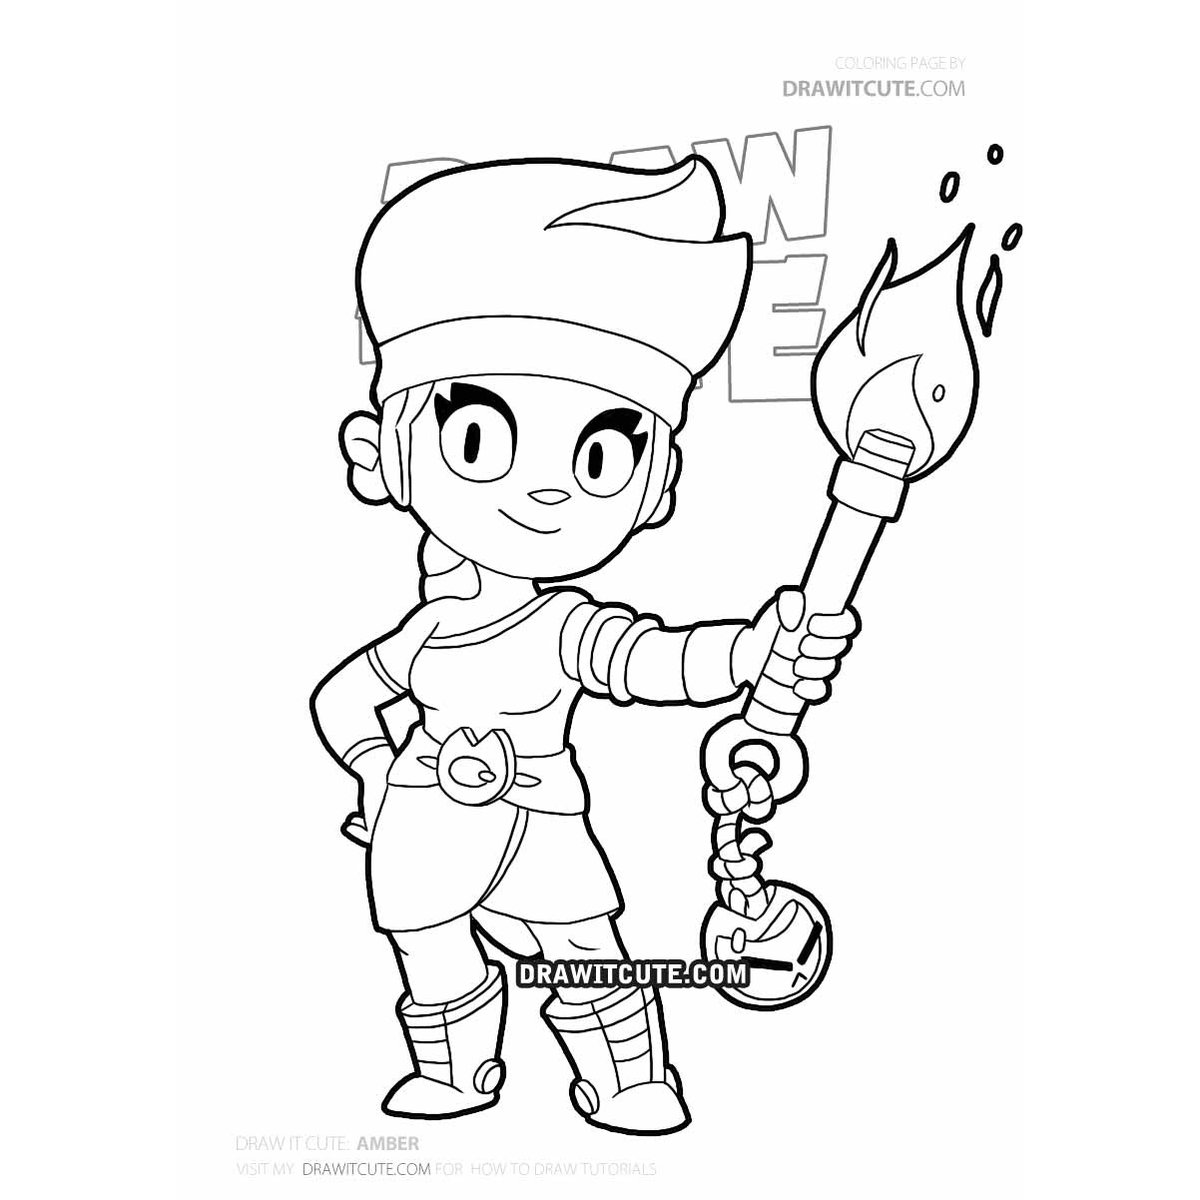 Draw It Cute Drawitcute1 Twitter - brawl stars coloring pages smooth lou